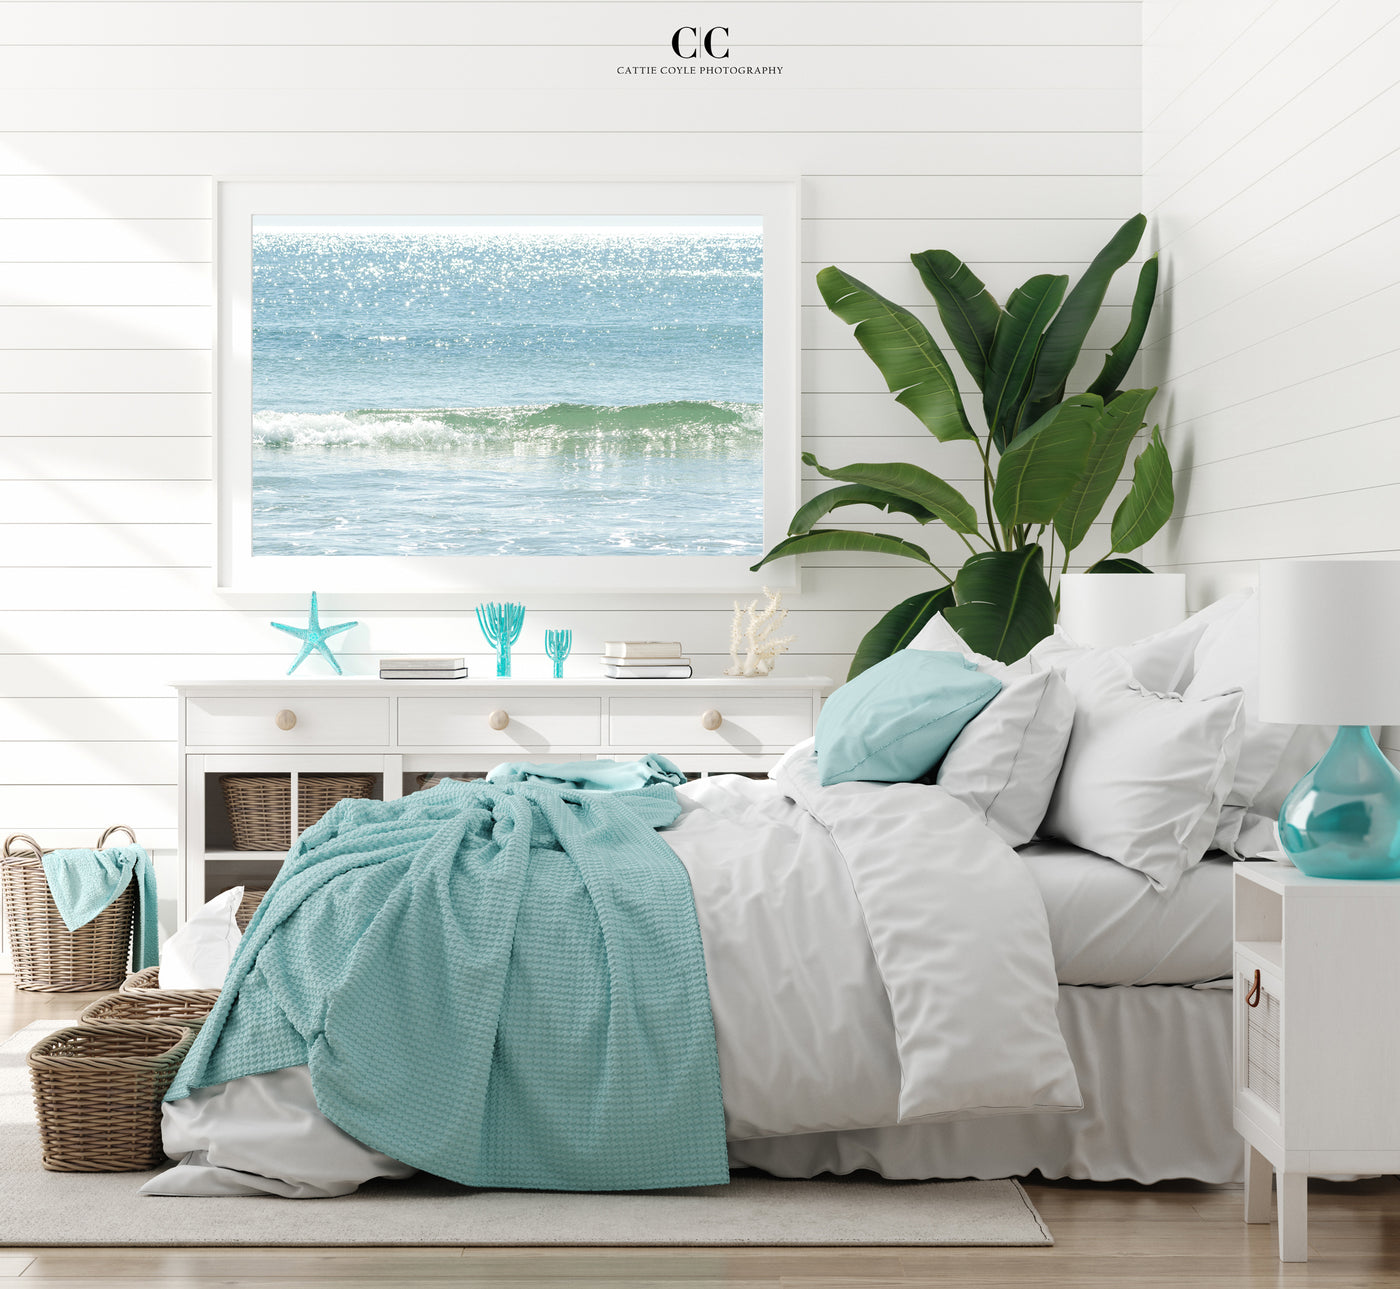 Large ocean art print by Cattie Coyle Photography in bedroom